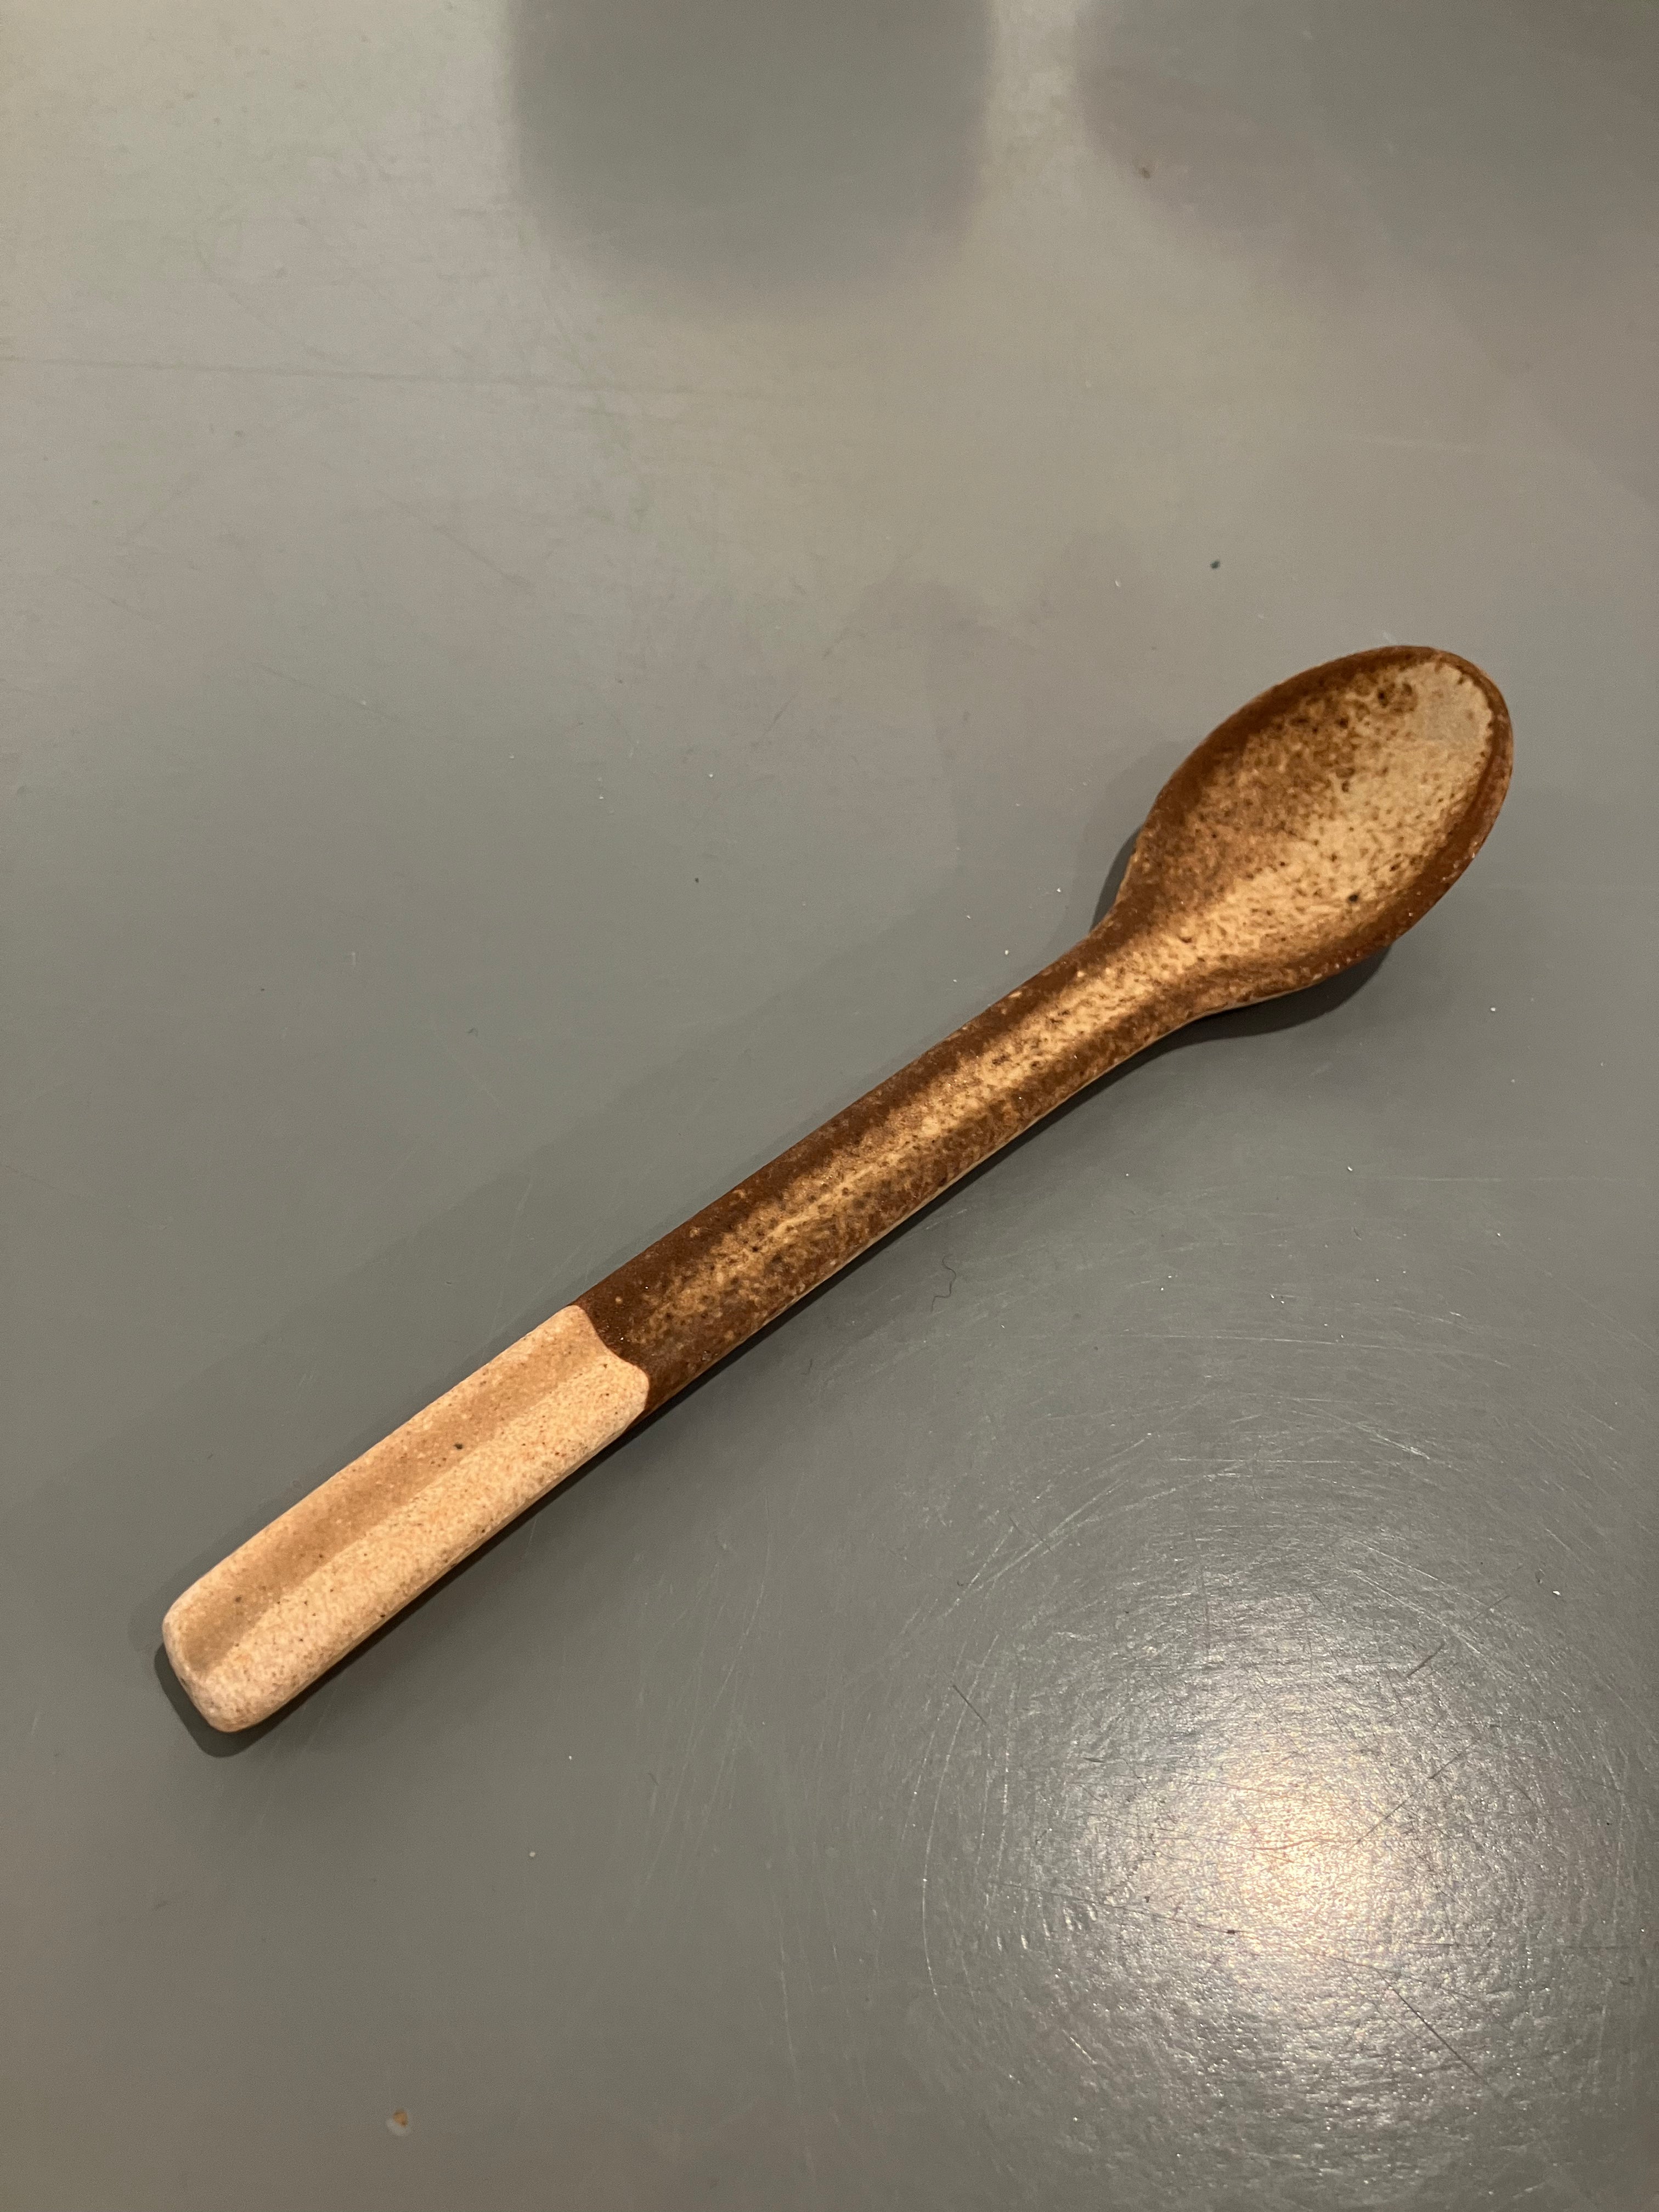 Rustic ceramic spoon with brown glaze